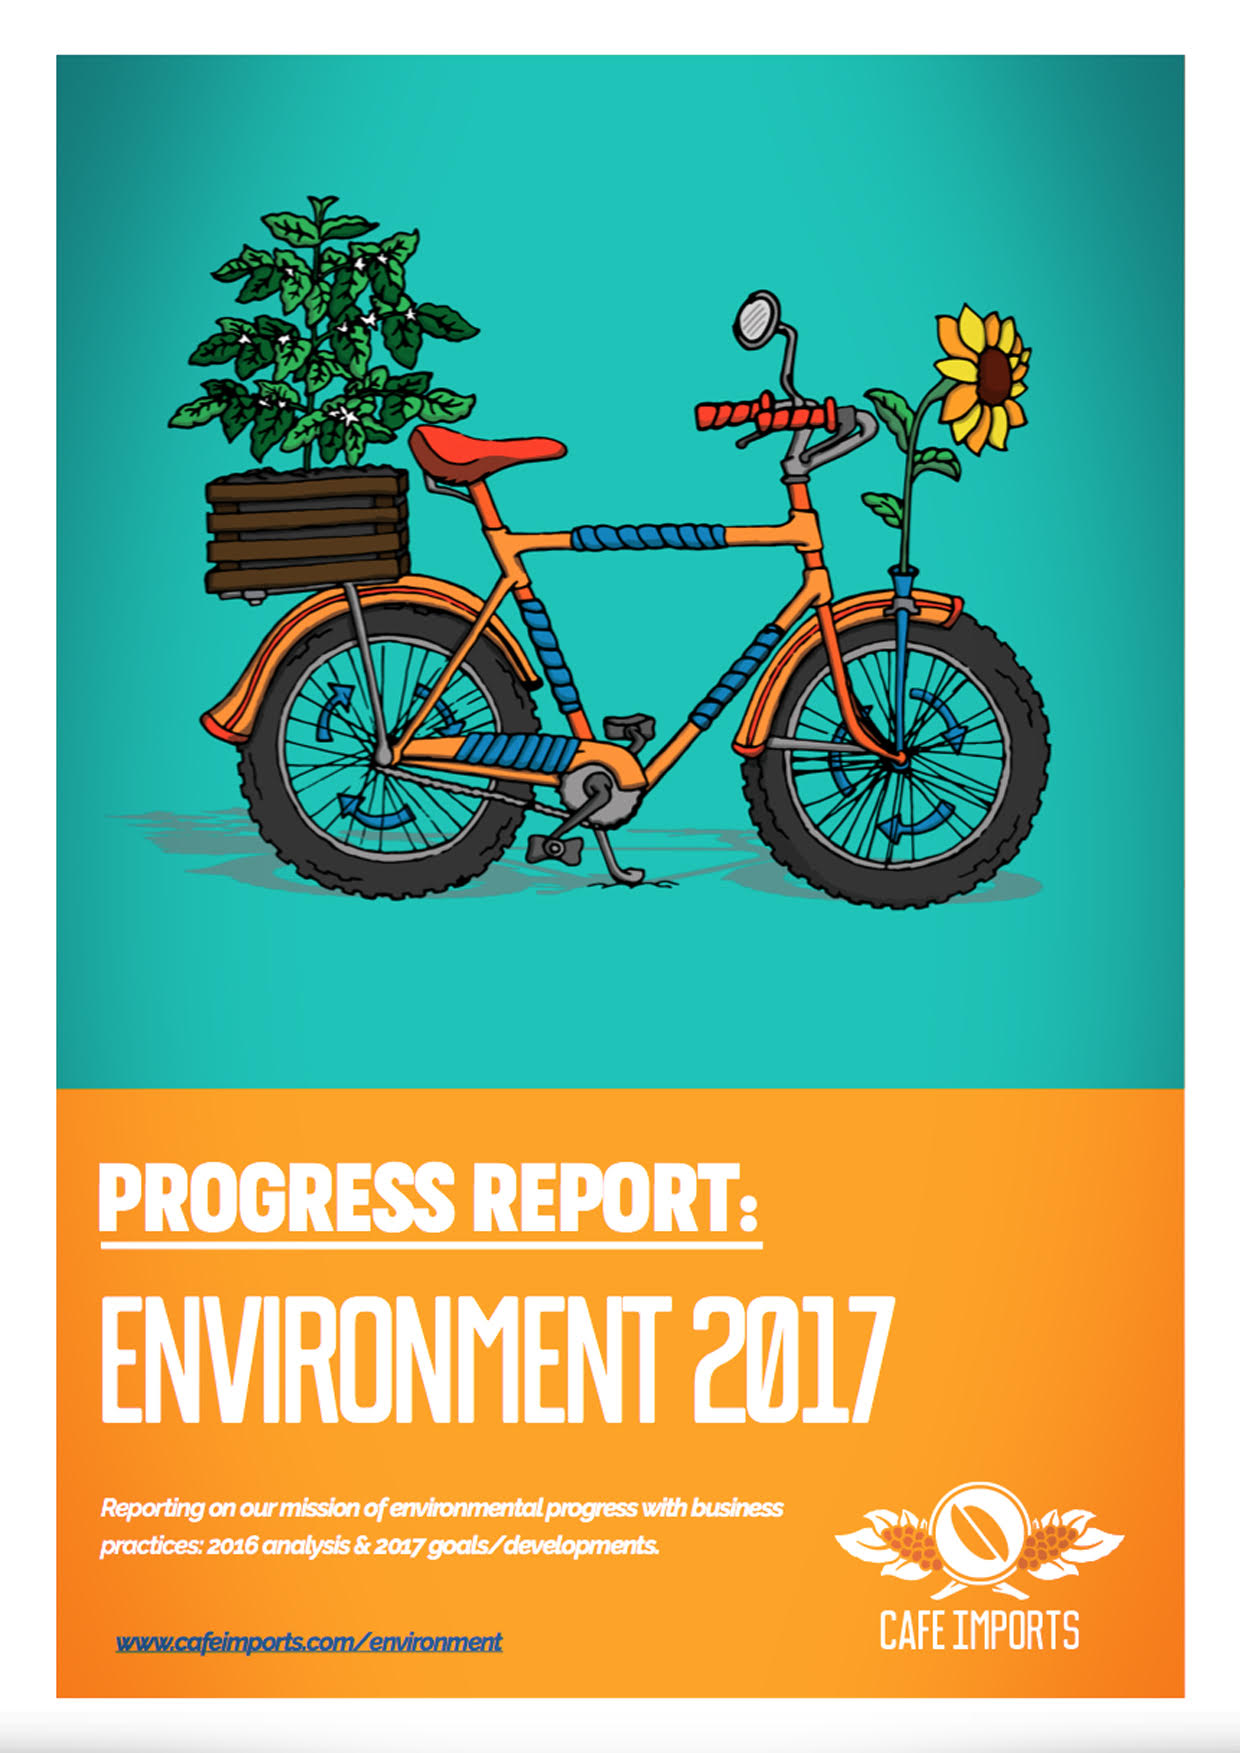 cafe imports environmental report